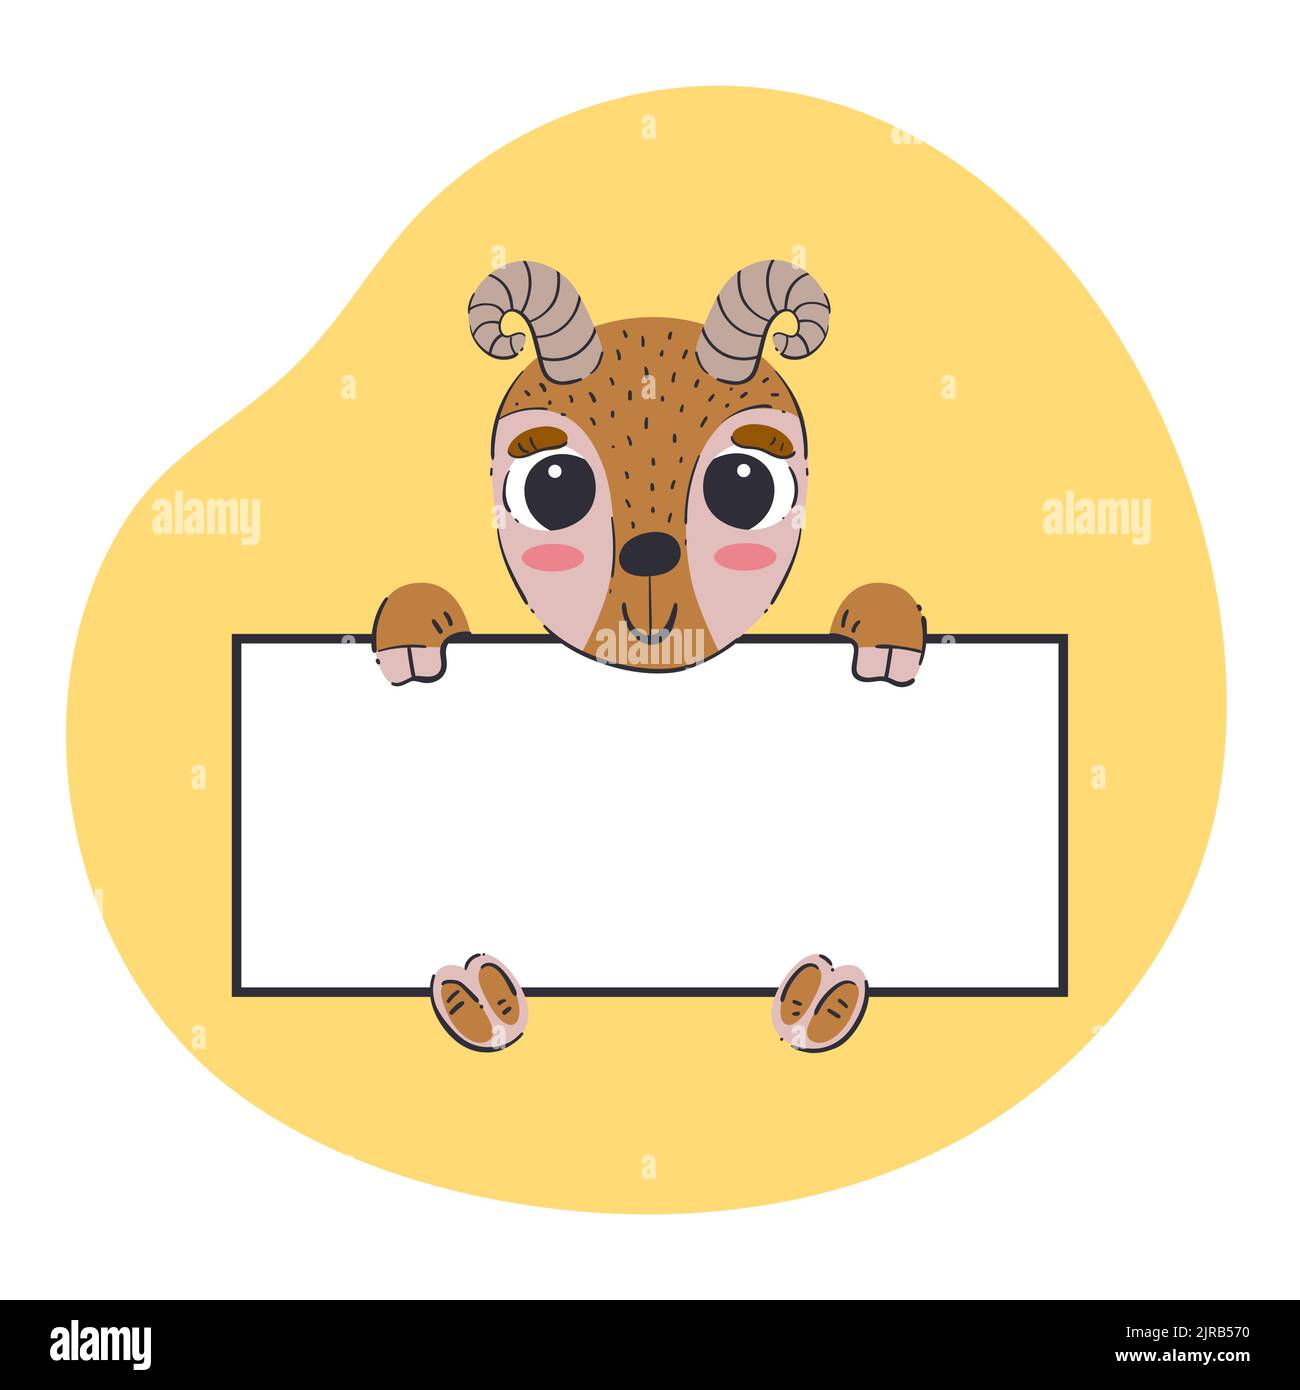 Goat holding a white banner. Cute hand-drawn vector illustration with yellow background. Editable card template. Stock Vector